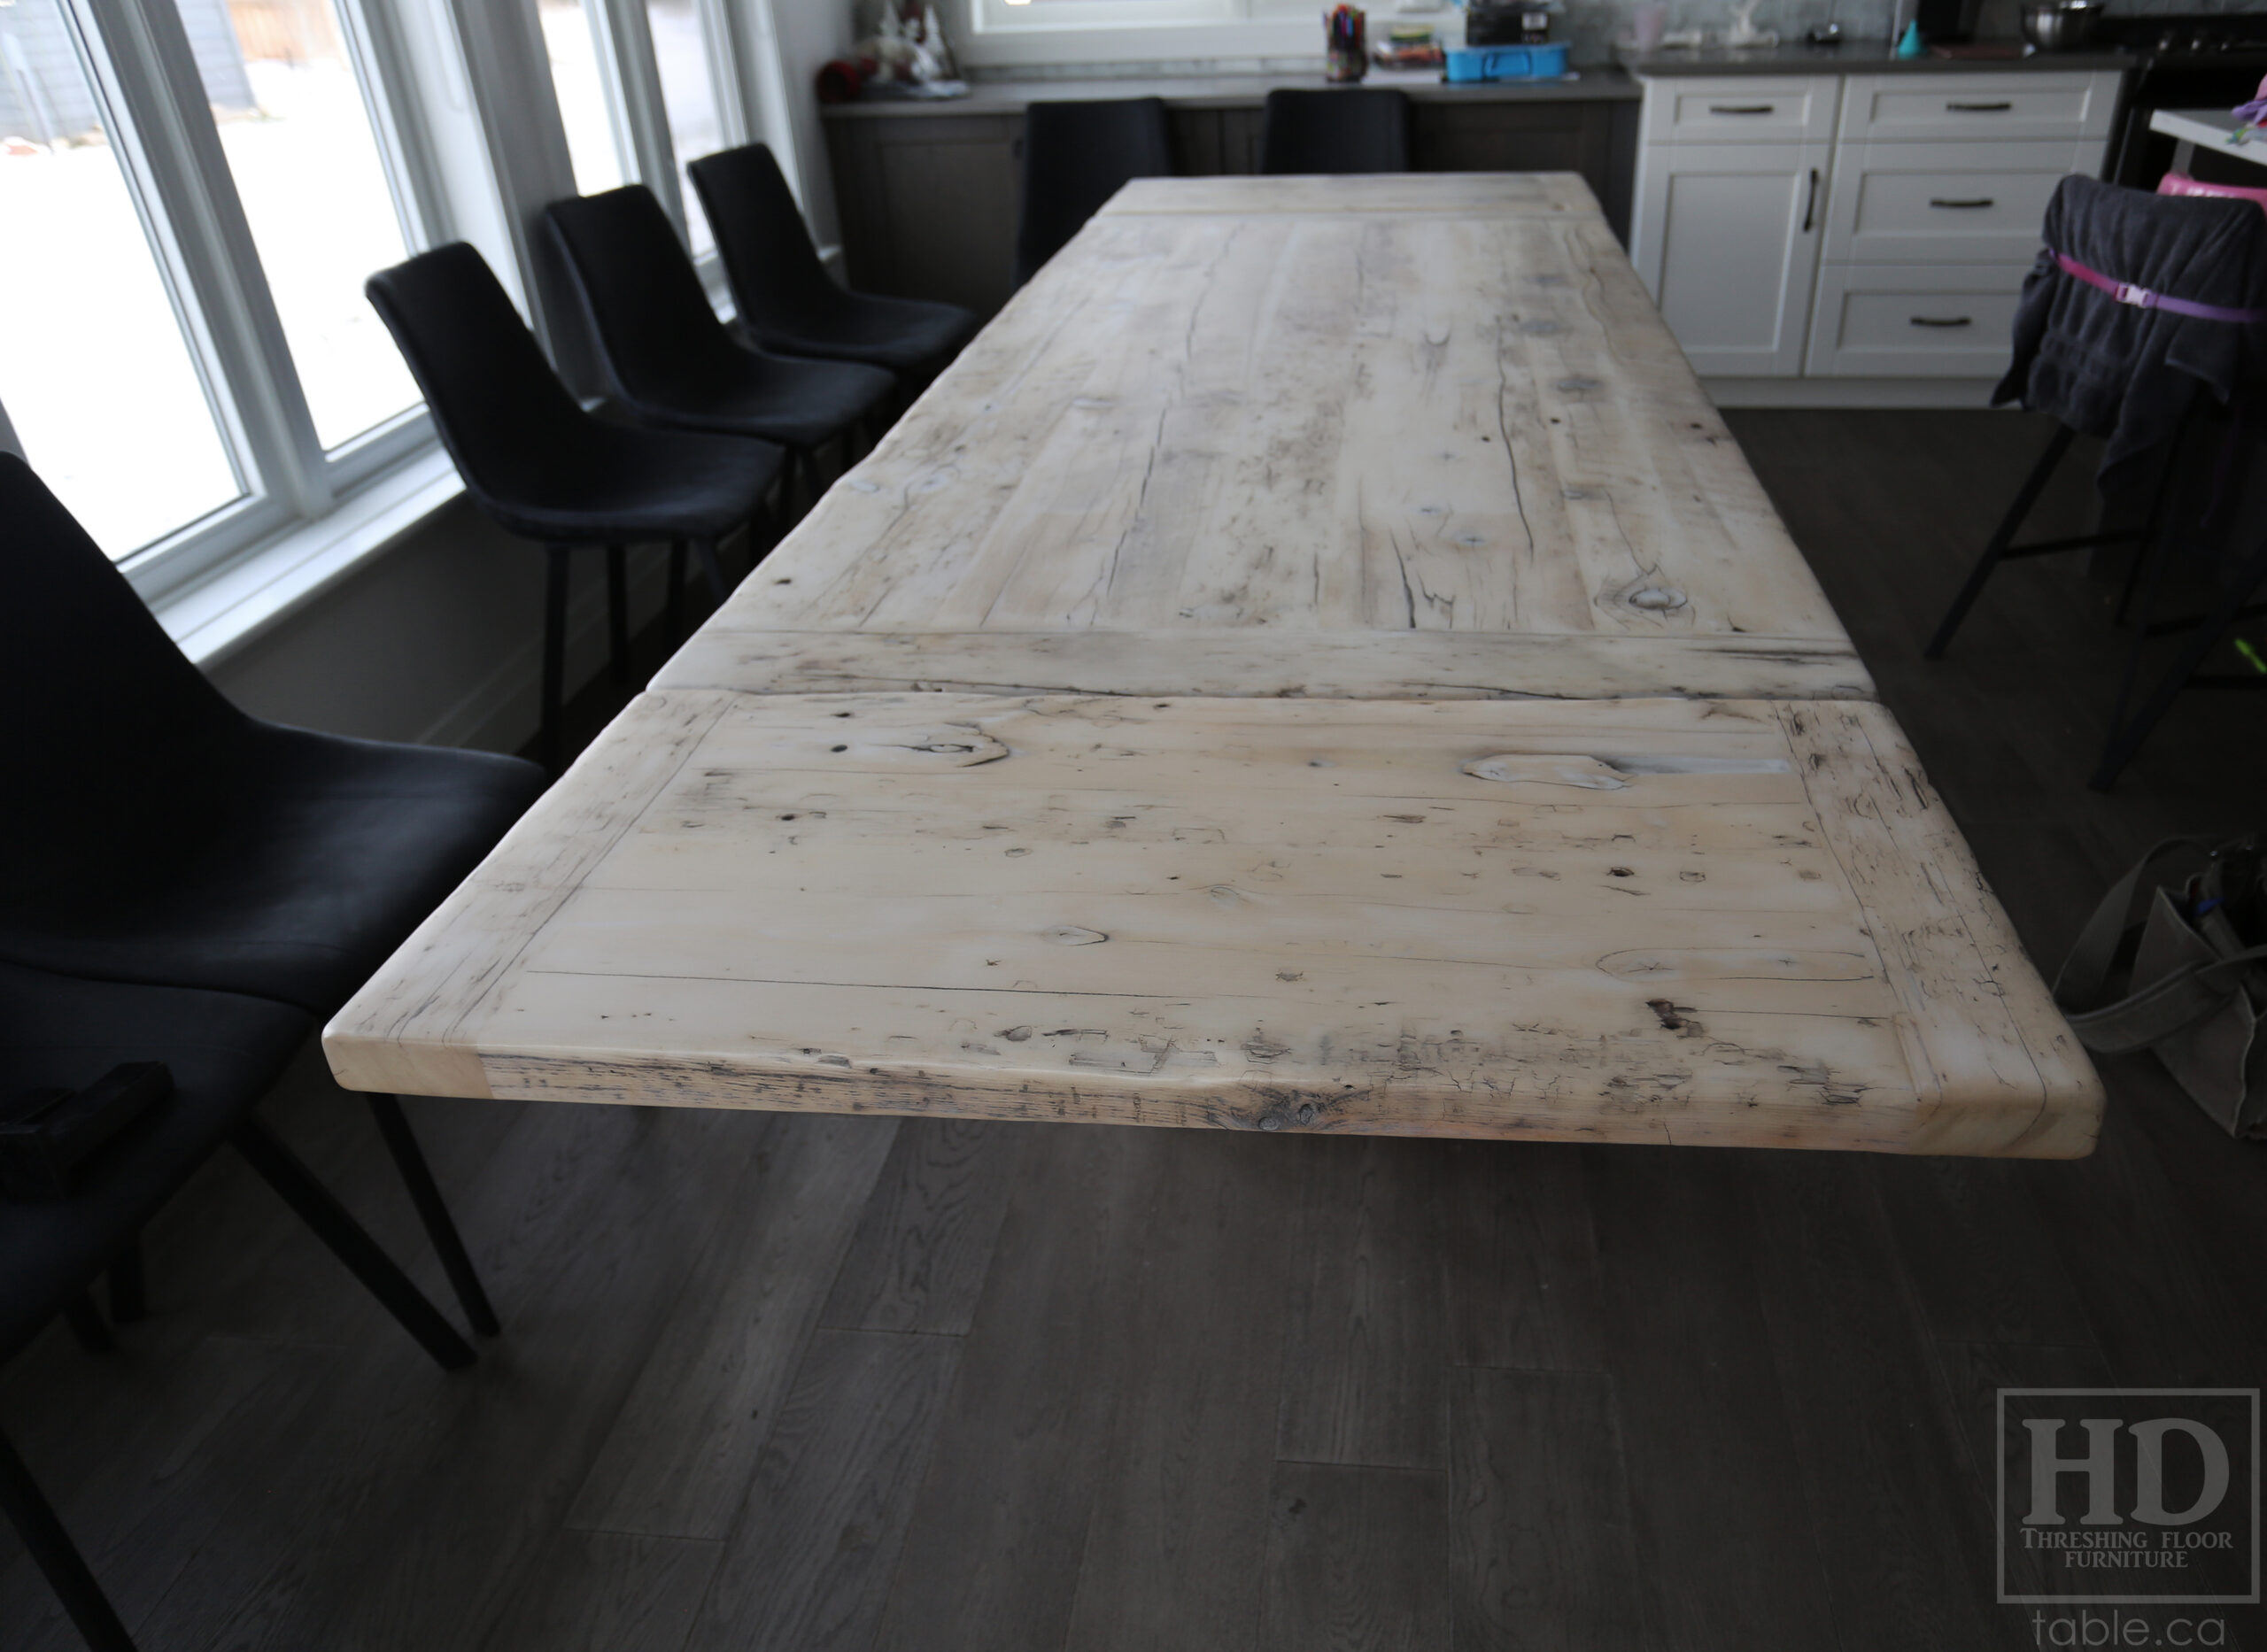 7â€™ Reclaimed Ontario Barnwood Table we made for a Kingsville, Ontario home â€“ 39â€ wide â€“ Modern Plank Base - Old Growth Hemlock Threshing Floor Construction â€“ Bleached Option  - Original edges & distressing maintained â€“ Bread Edge Ends - Premium epoxy + matte polyurethane finish â€“ Two 18â€ Leaf Extensions - www.table.ca